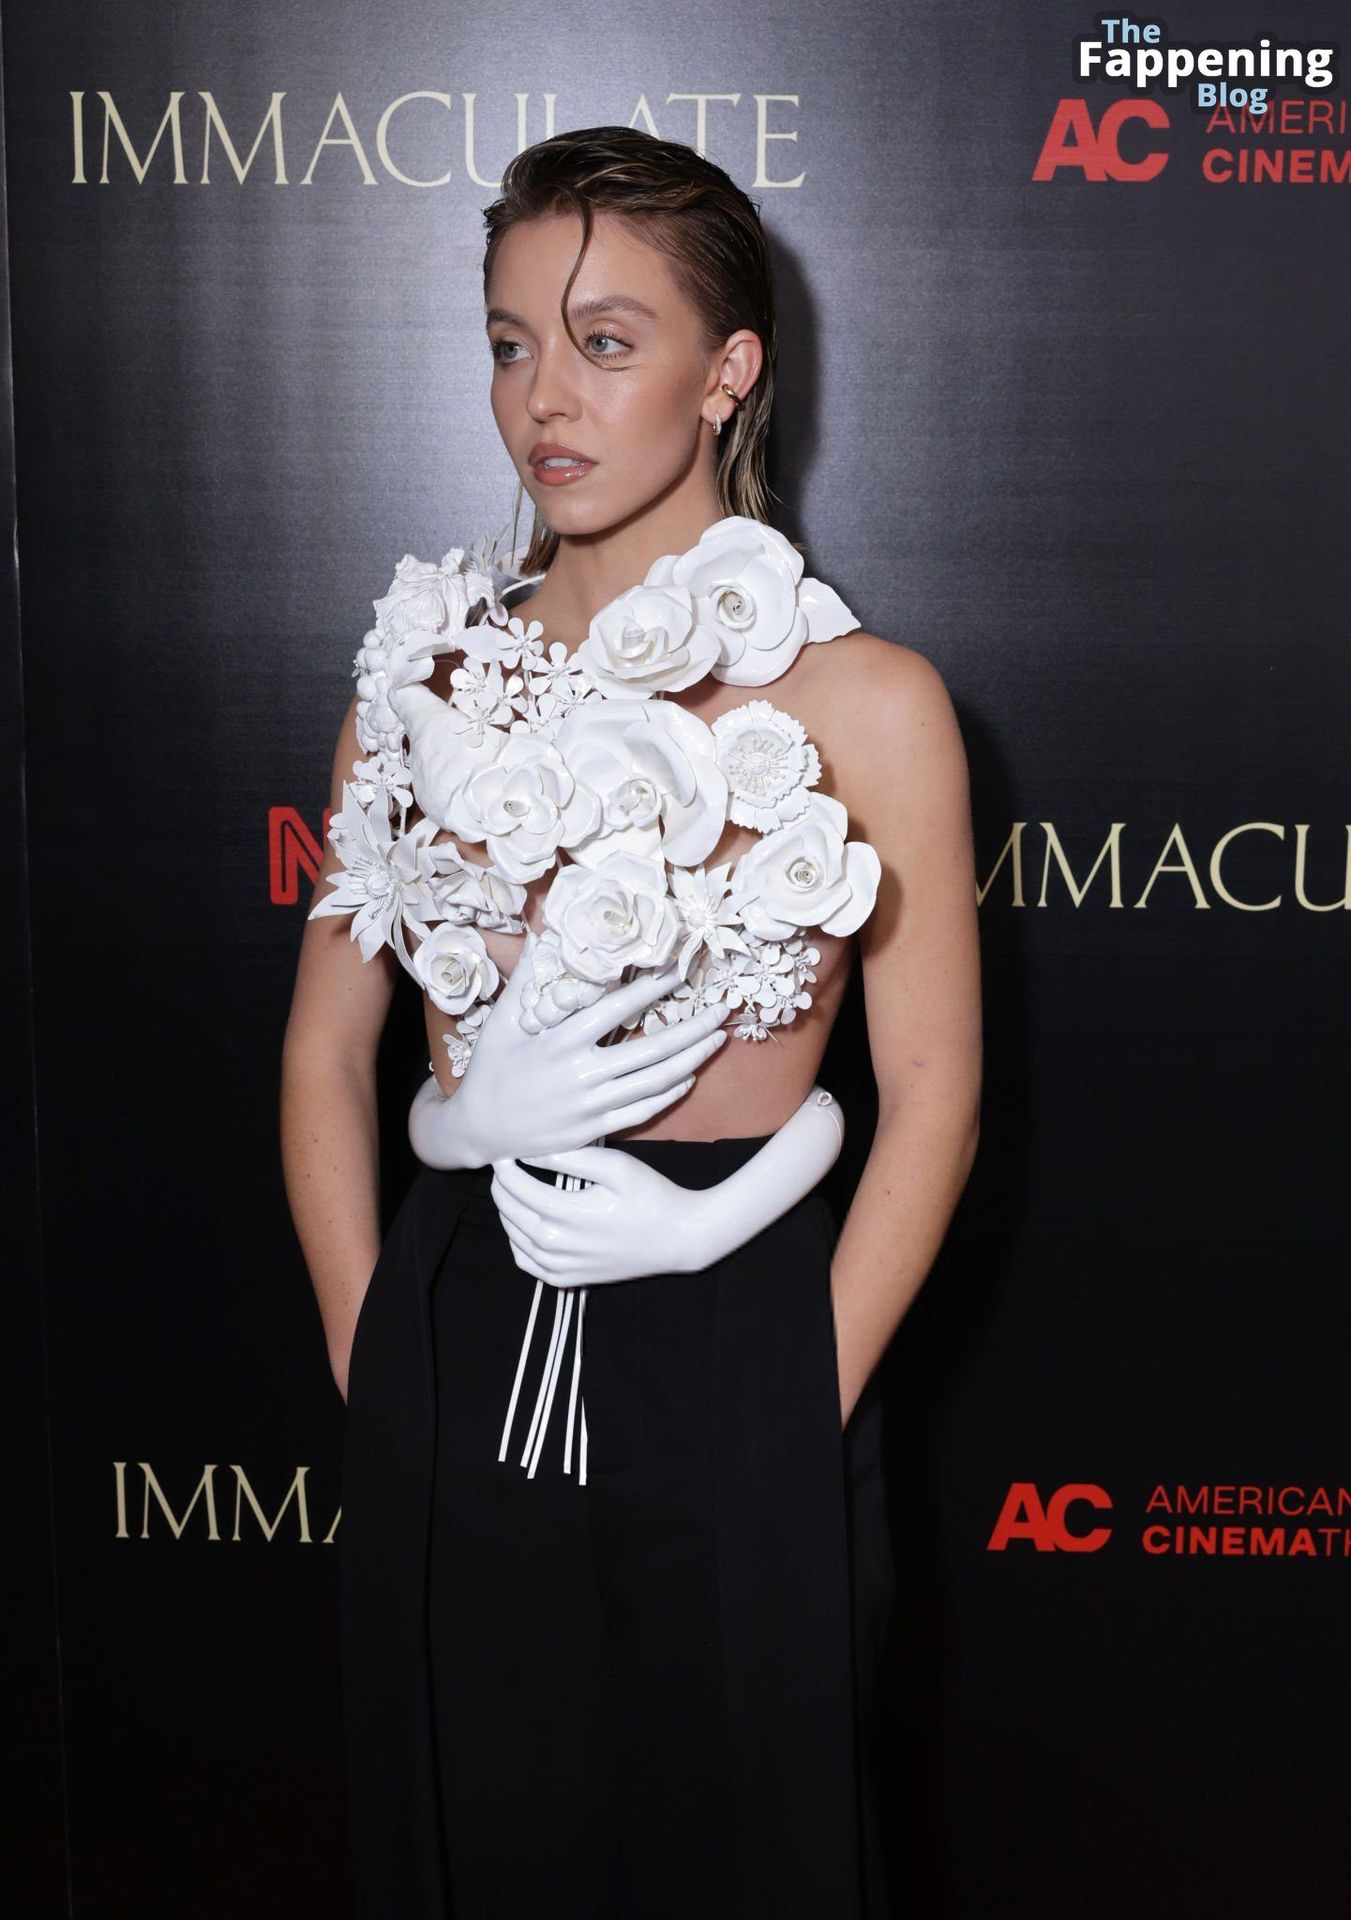 Sydney-Sweeney-Immaculate-Premiere-Glamorous-Outfit-Breasts-14-thefappeningblog.com_.jpg